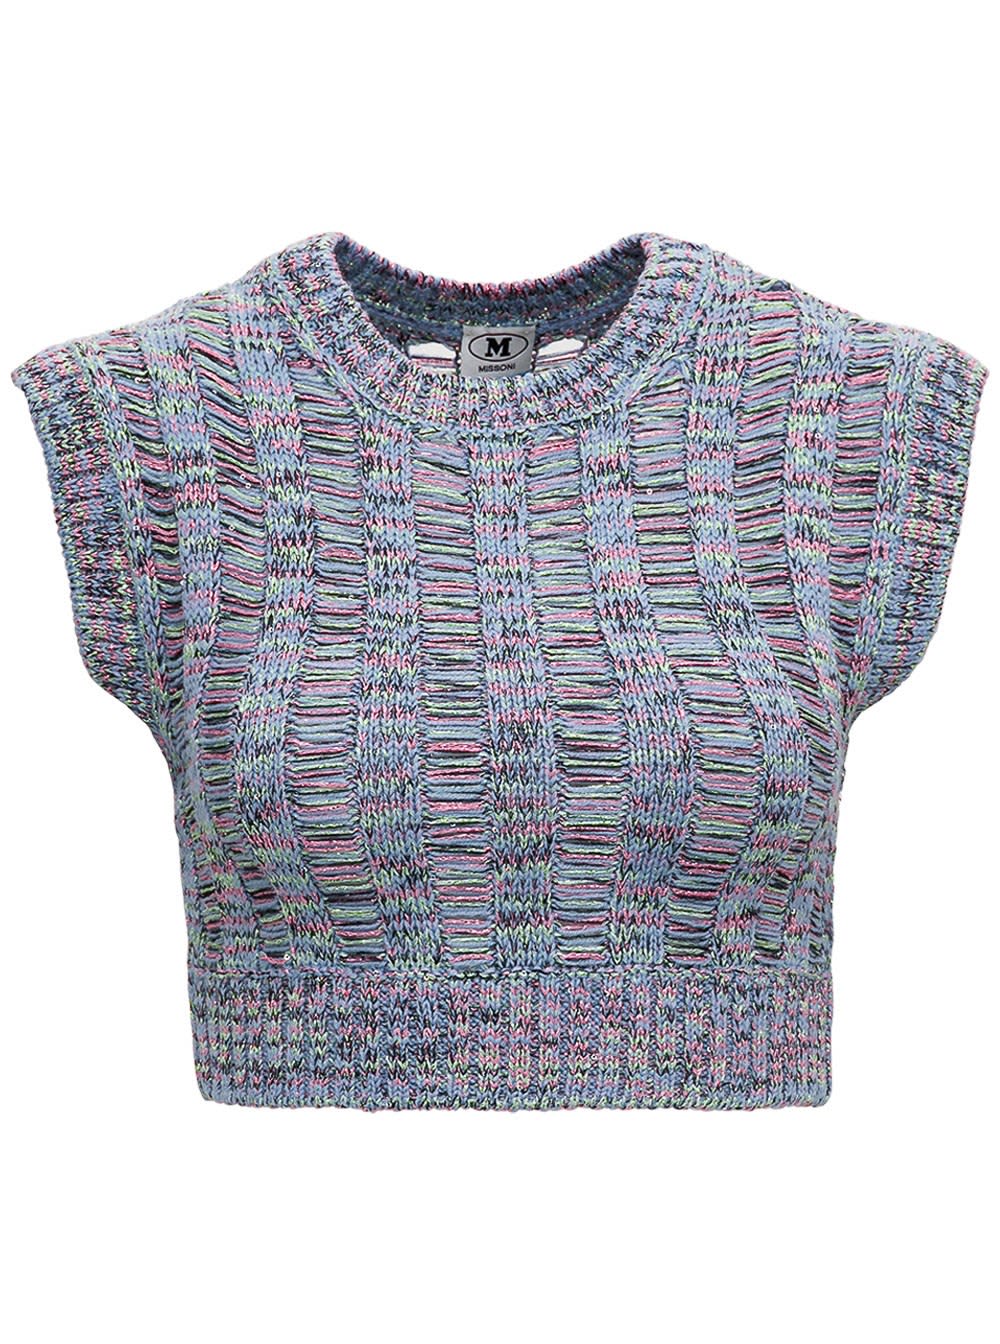 M Missoni Multicolor Knitted Crop Top